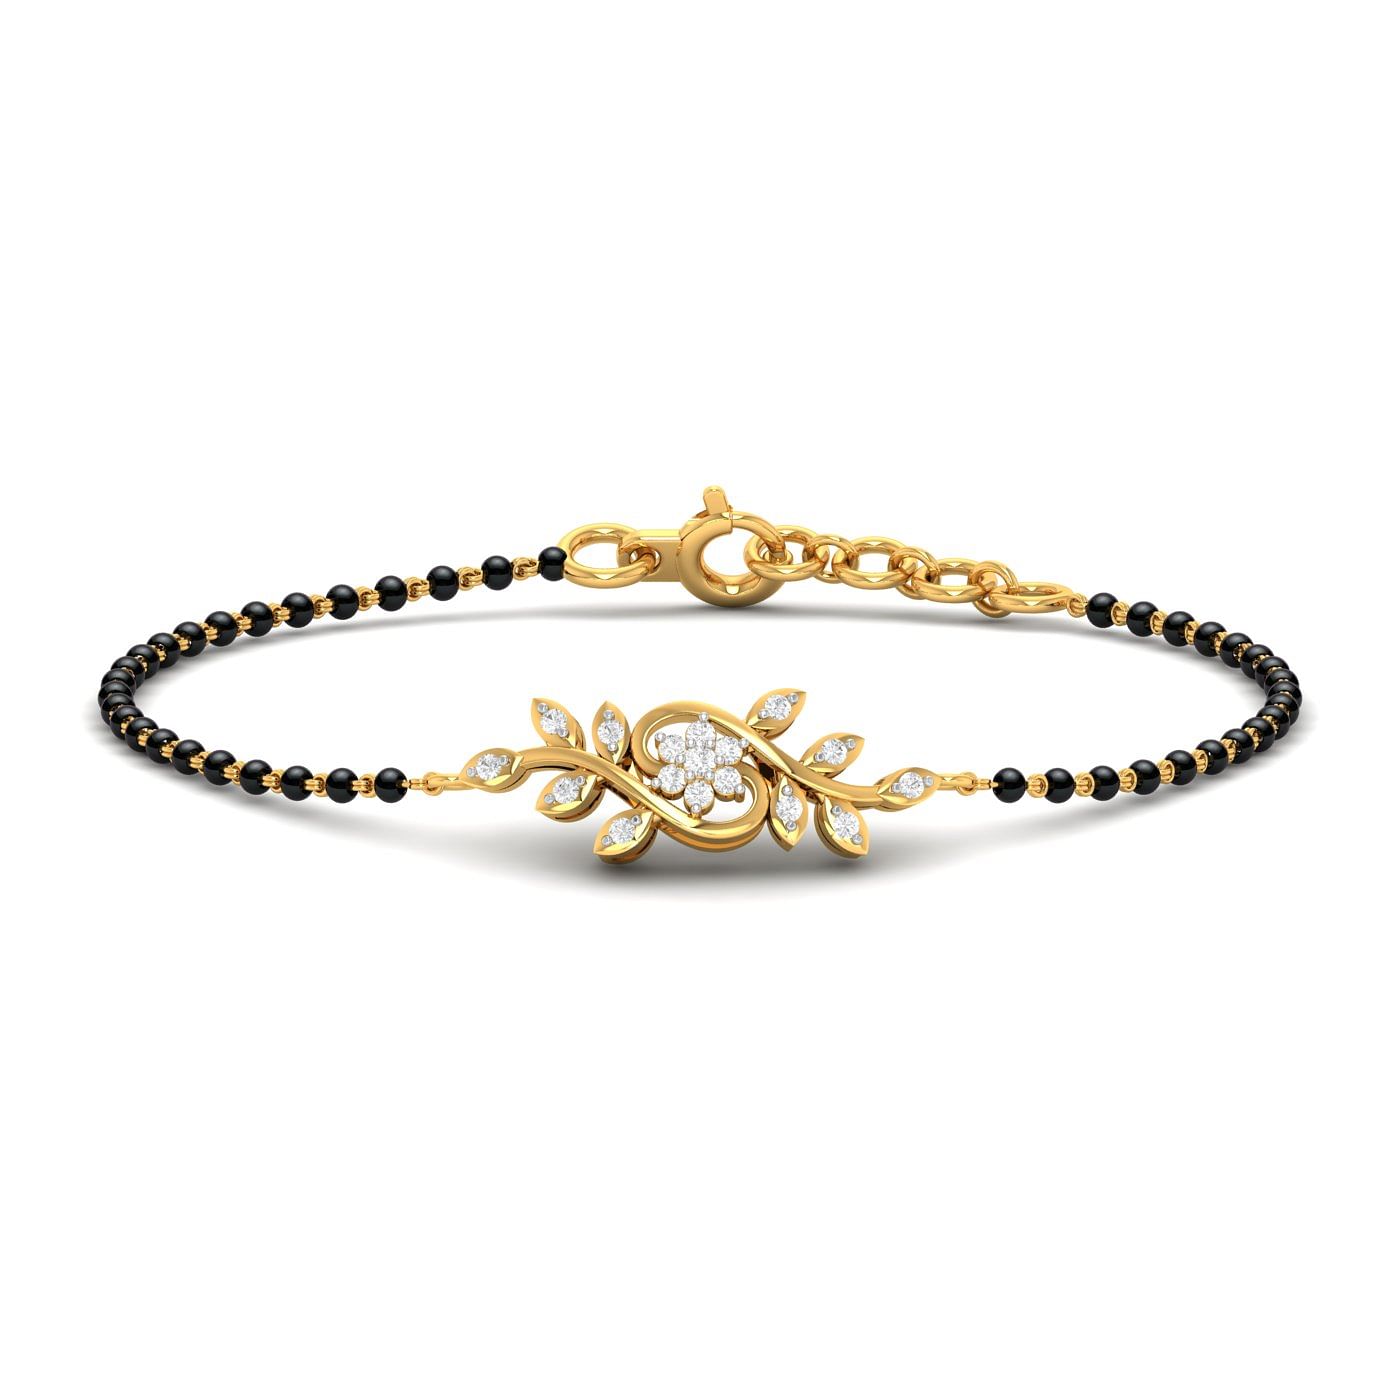 Yellow gold Leaves Style Mangalsutra Bracelet